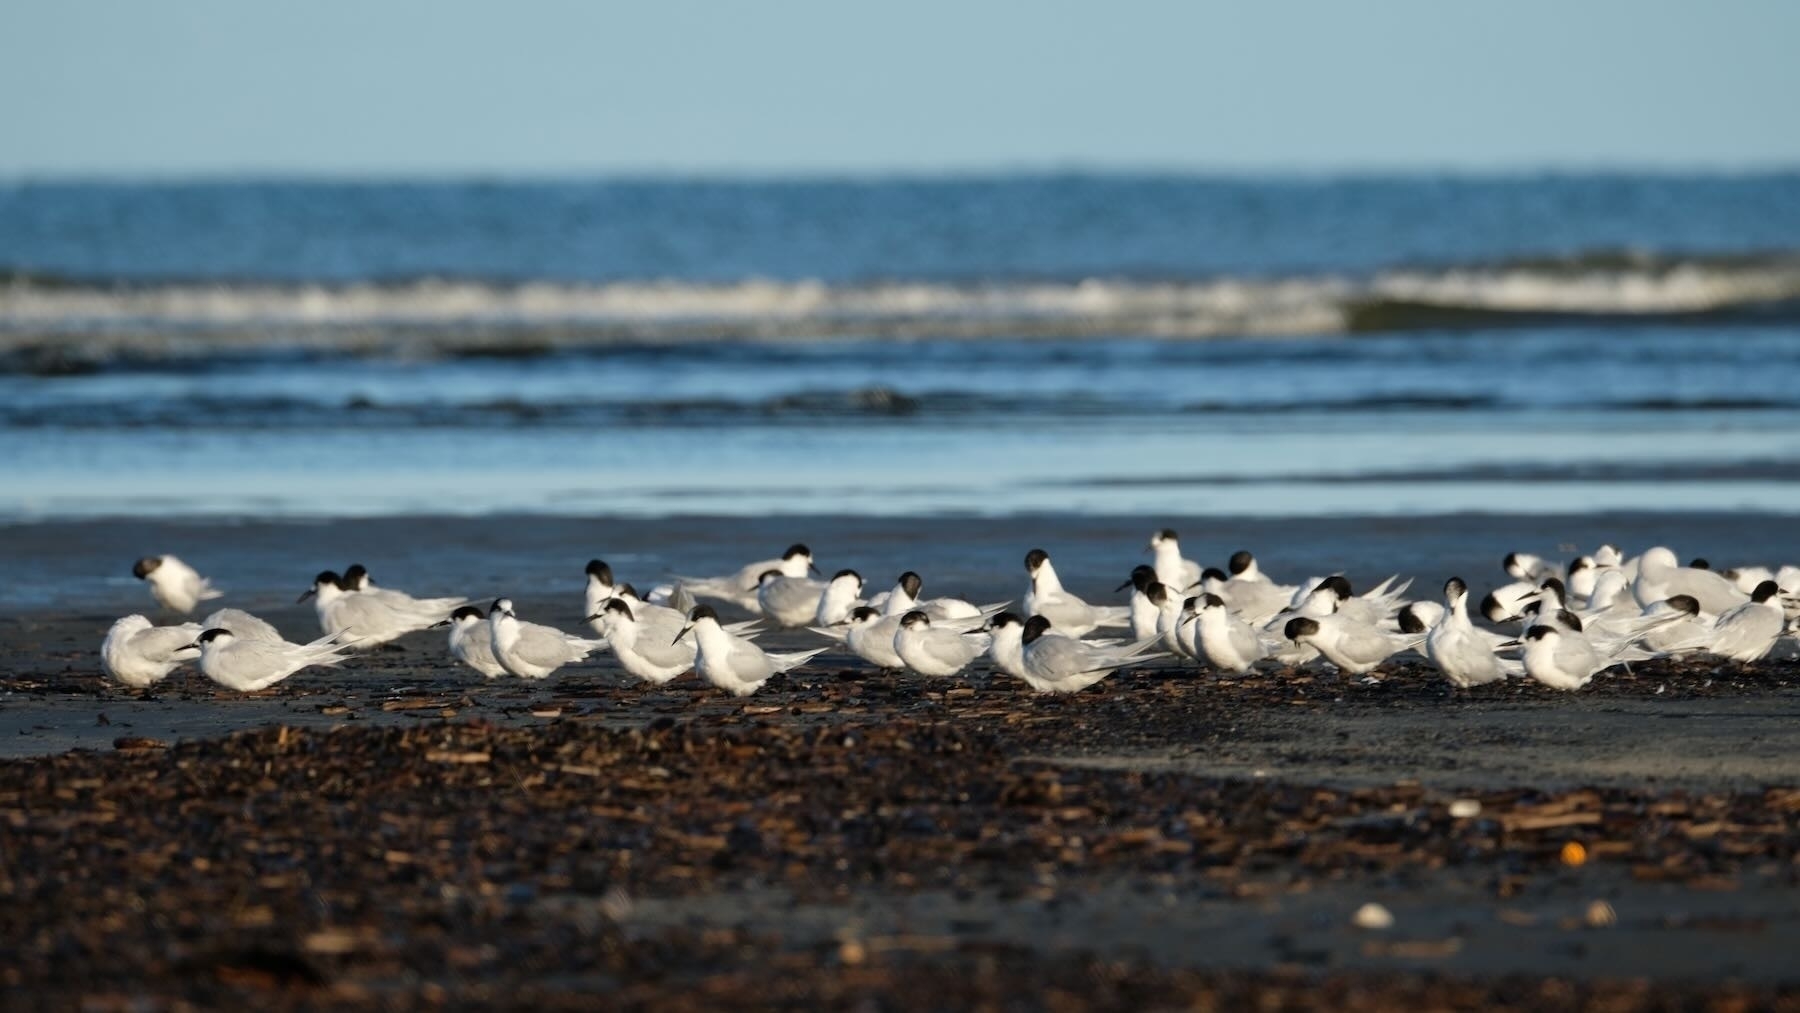 Part of the flock of terns, with sea as backdrop. 